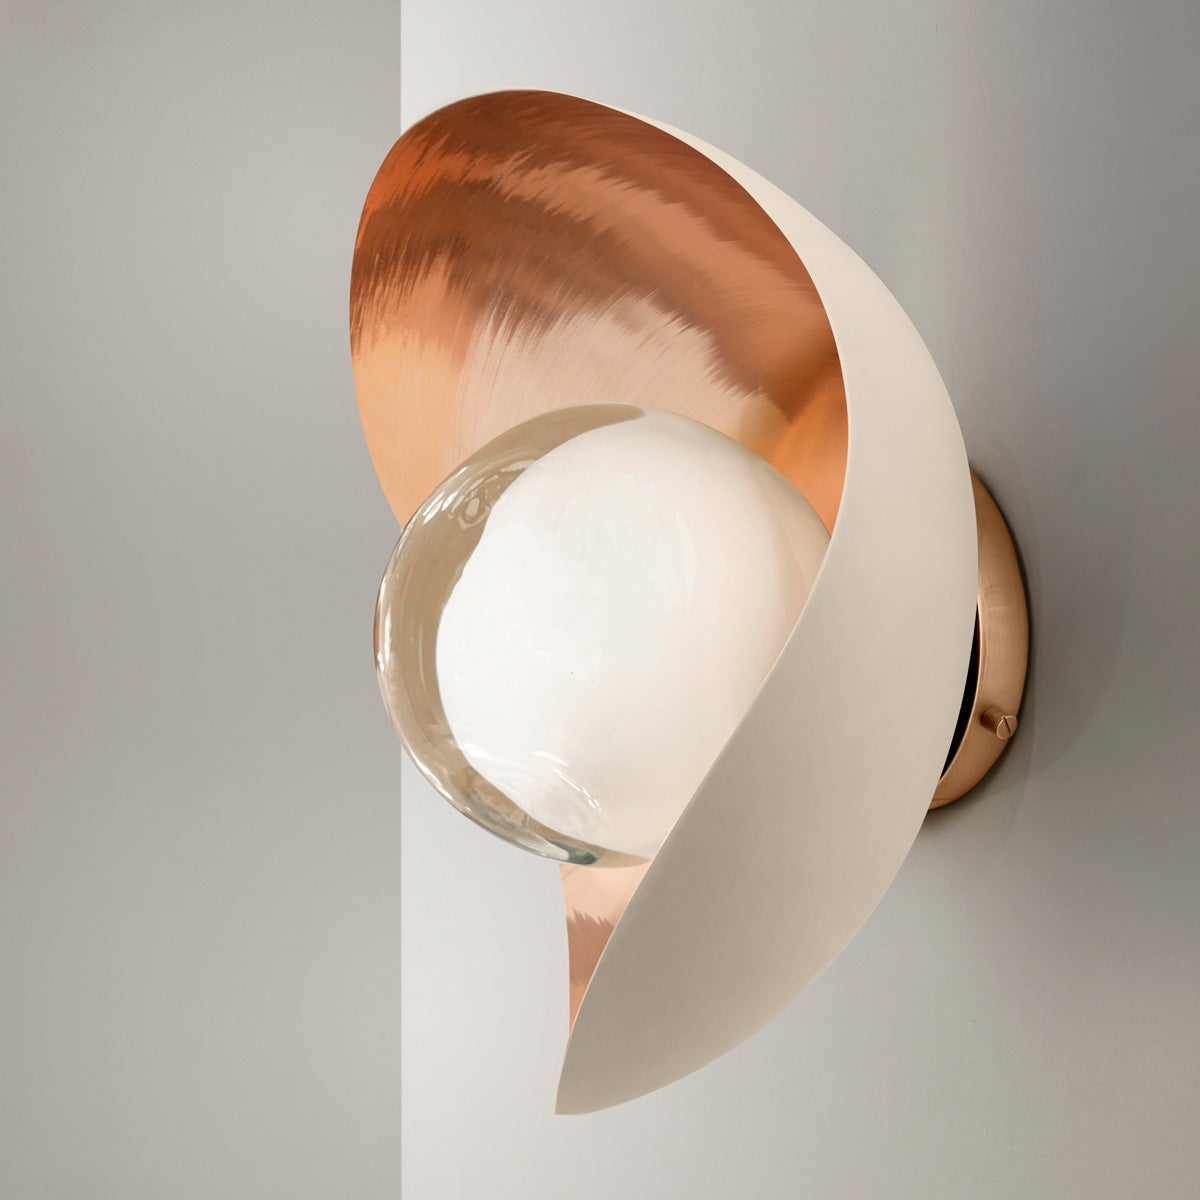 Contemporary Perla Wall Light by Gaspare Asaro-Satin Brass/Polished Nickel Finish For Sale